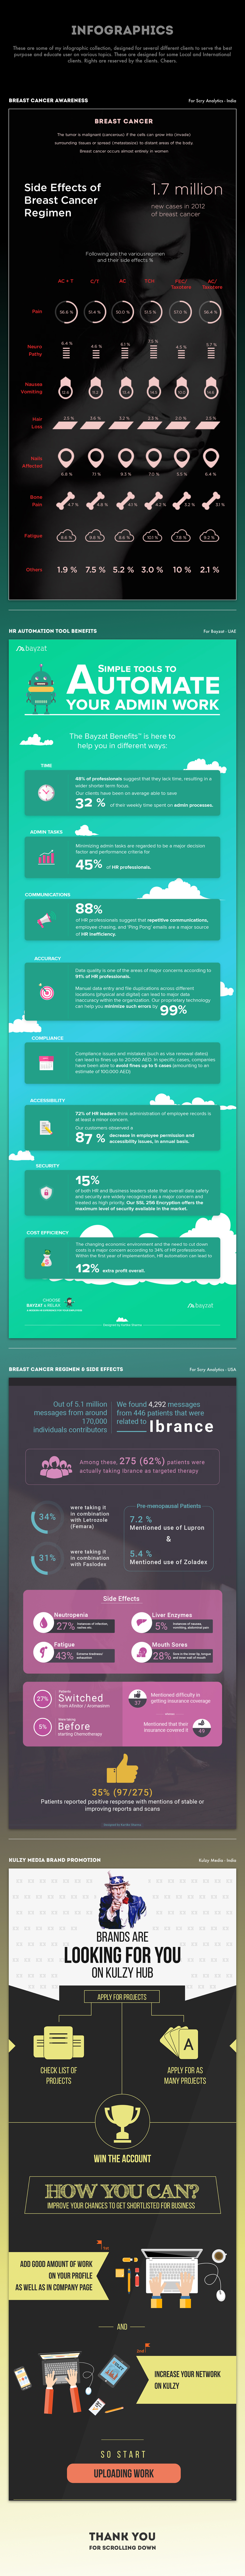 infographs infographics cancer breast cancer automation Drugs side effects kulzy analytics bayzat